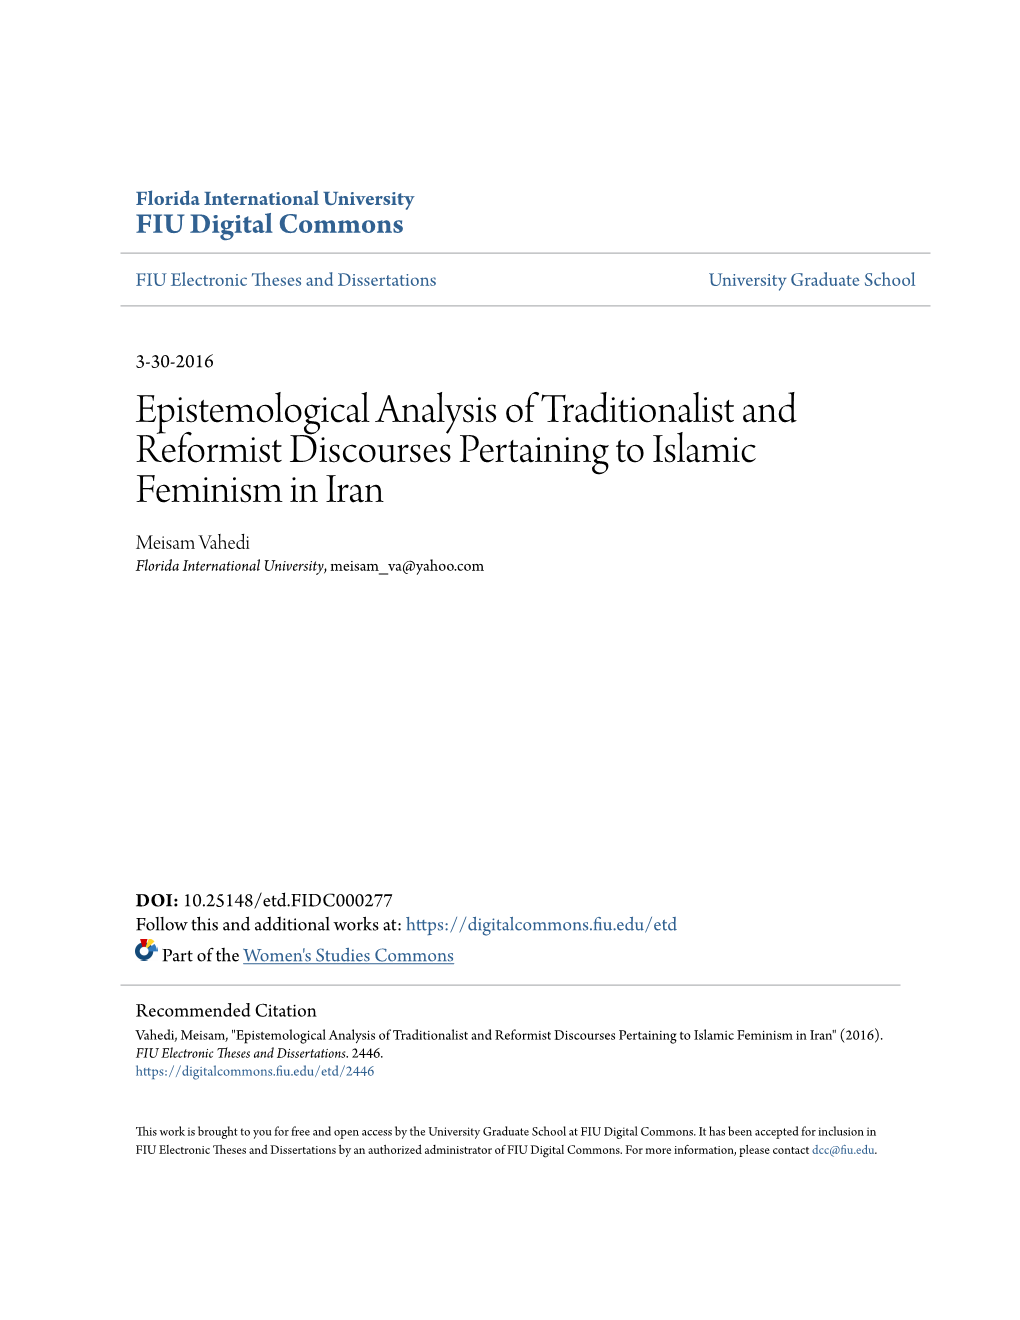 Epistemological Analysis of Traditionalist and Reformist